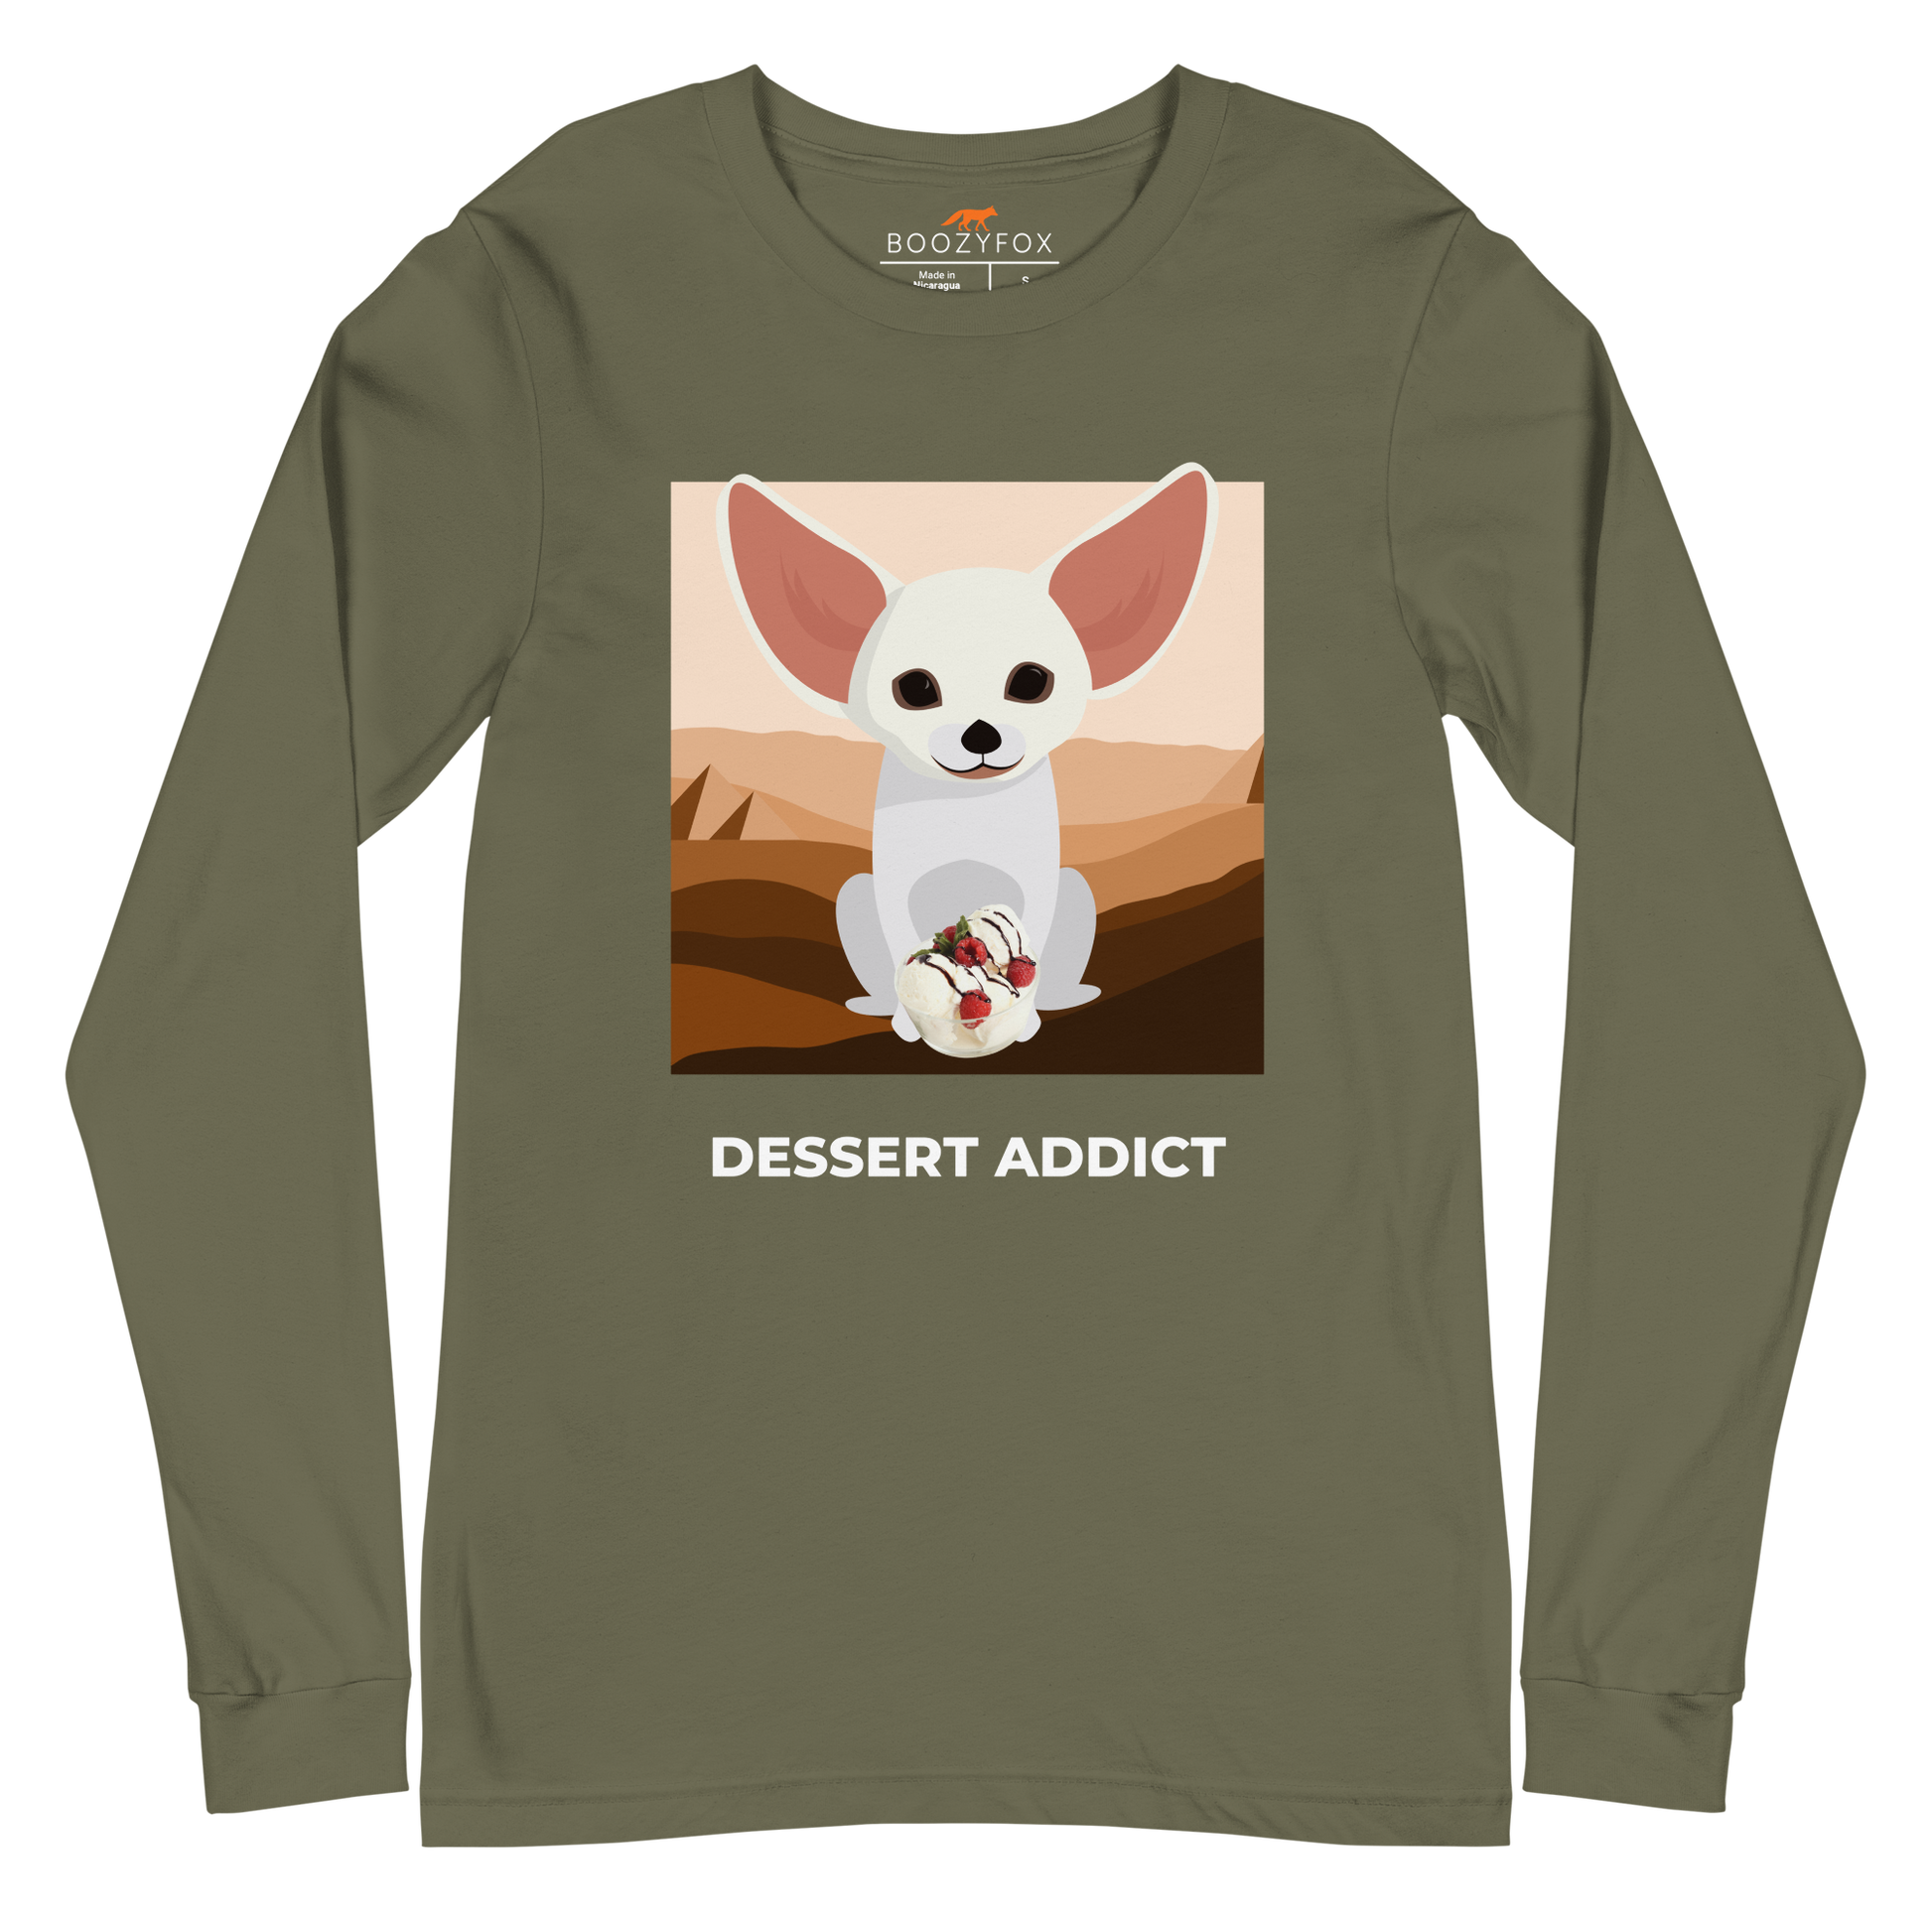 Military Green Fennec Fox Long Sleeve Tee featuring a delightful Dessert Addict graphic on the chest - Funny Fennec Fox Long Sleeve Graphic Tees - Boozy Fox